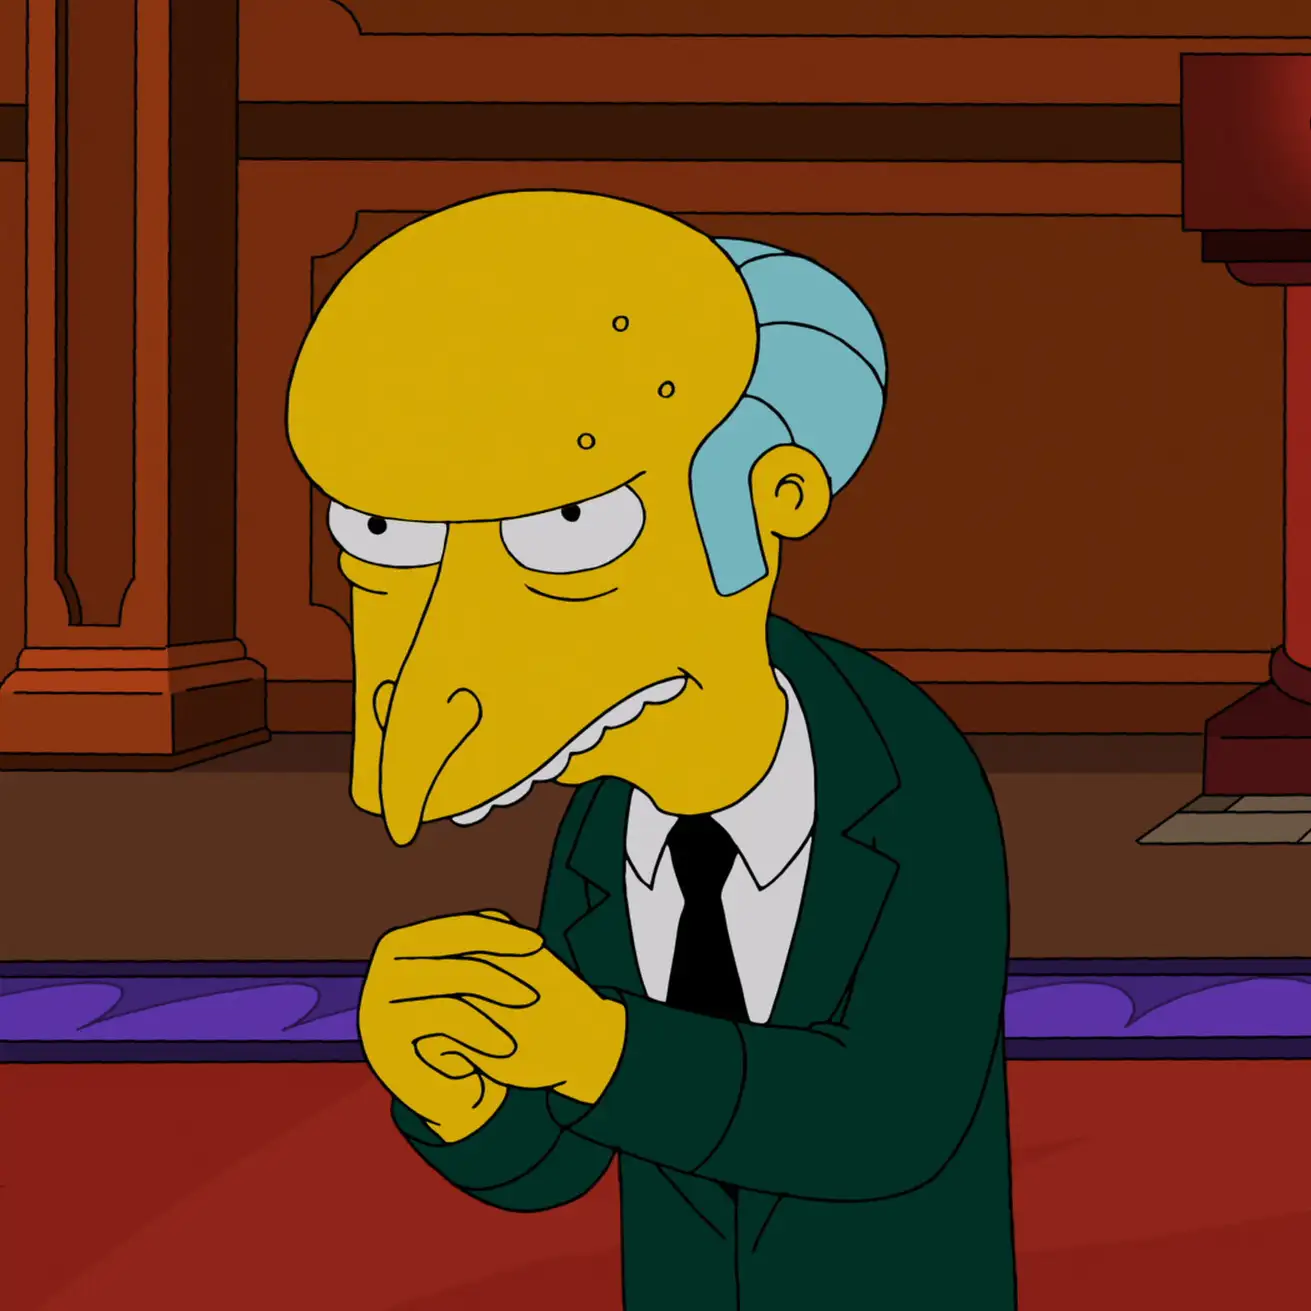 Monty Burns on THE SIMPSONS